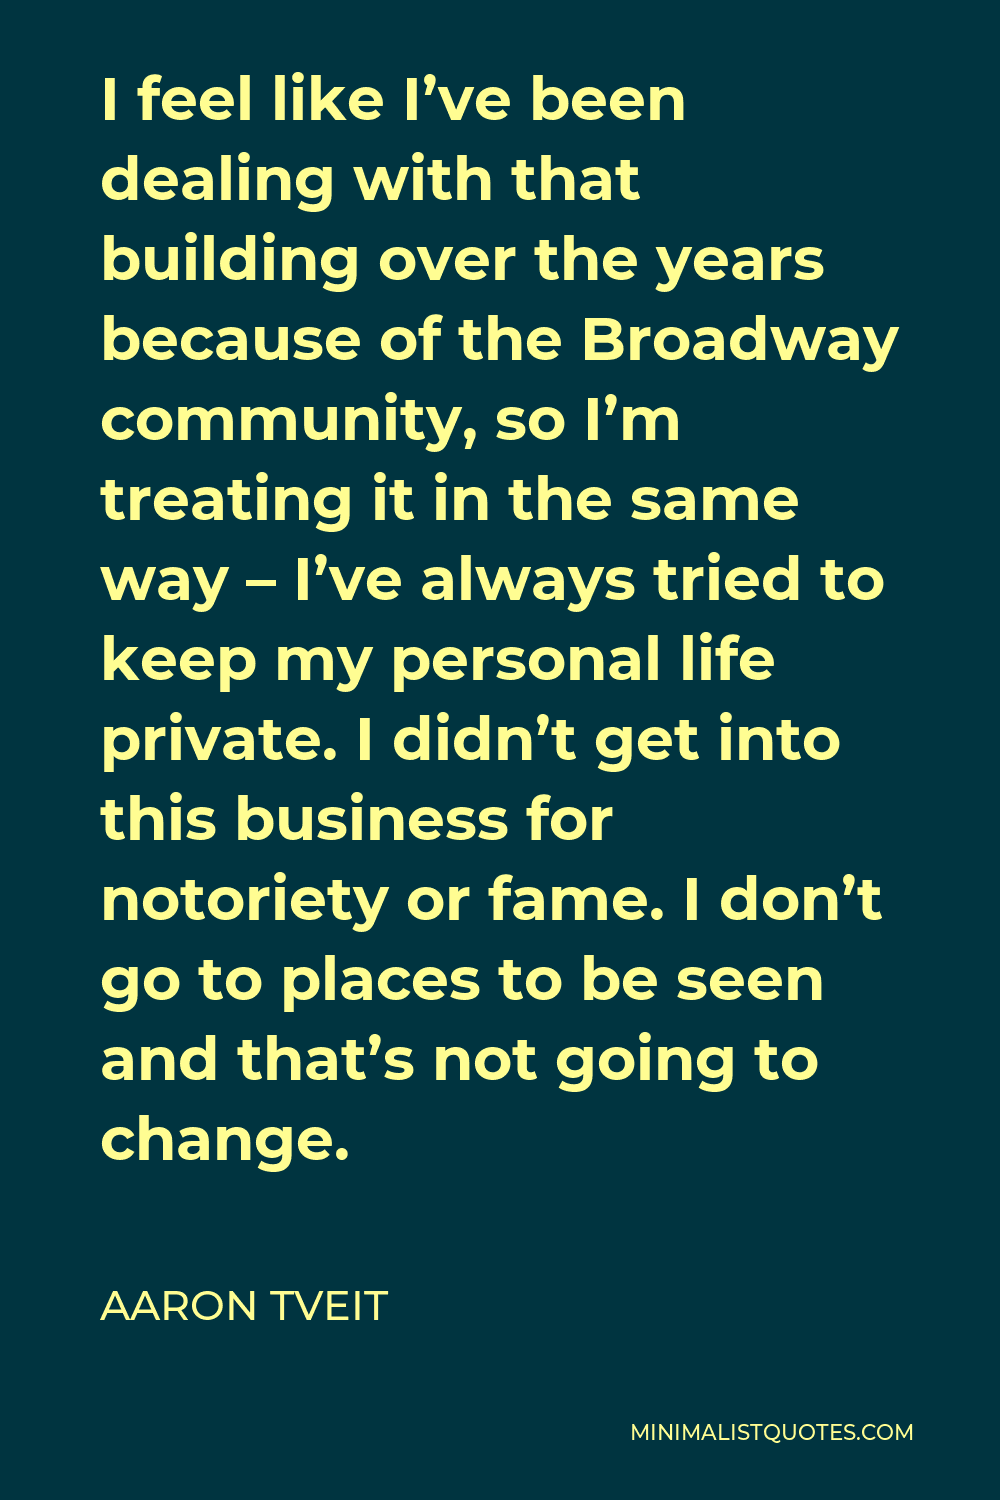 Aaron Tveit Quote - I feel like I’ve been dealing with that building over the years because of the Broadway community, so I’m treating it in the same way – I’ve always tried to keep my personal life private. I didn’t get into this business for notoriety or fame. I don’t go to places to be seen and that’s not going to change.